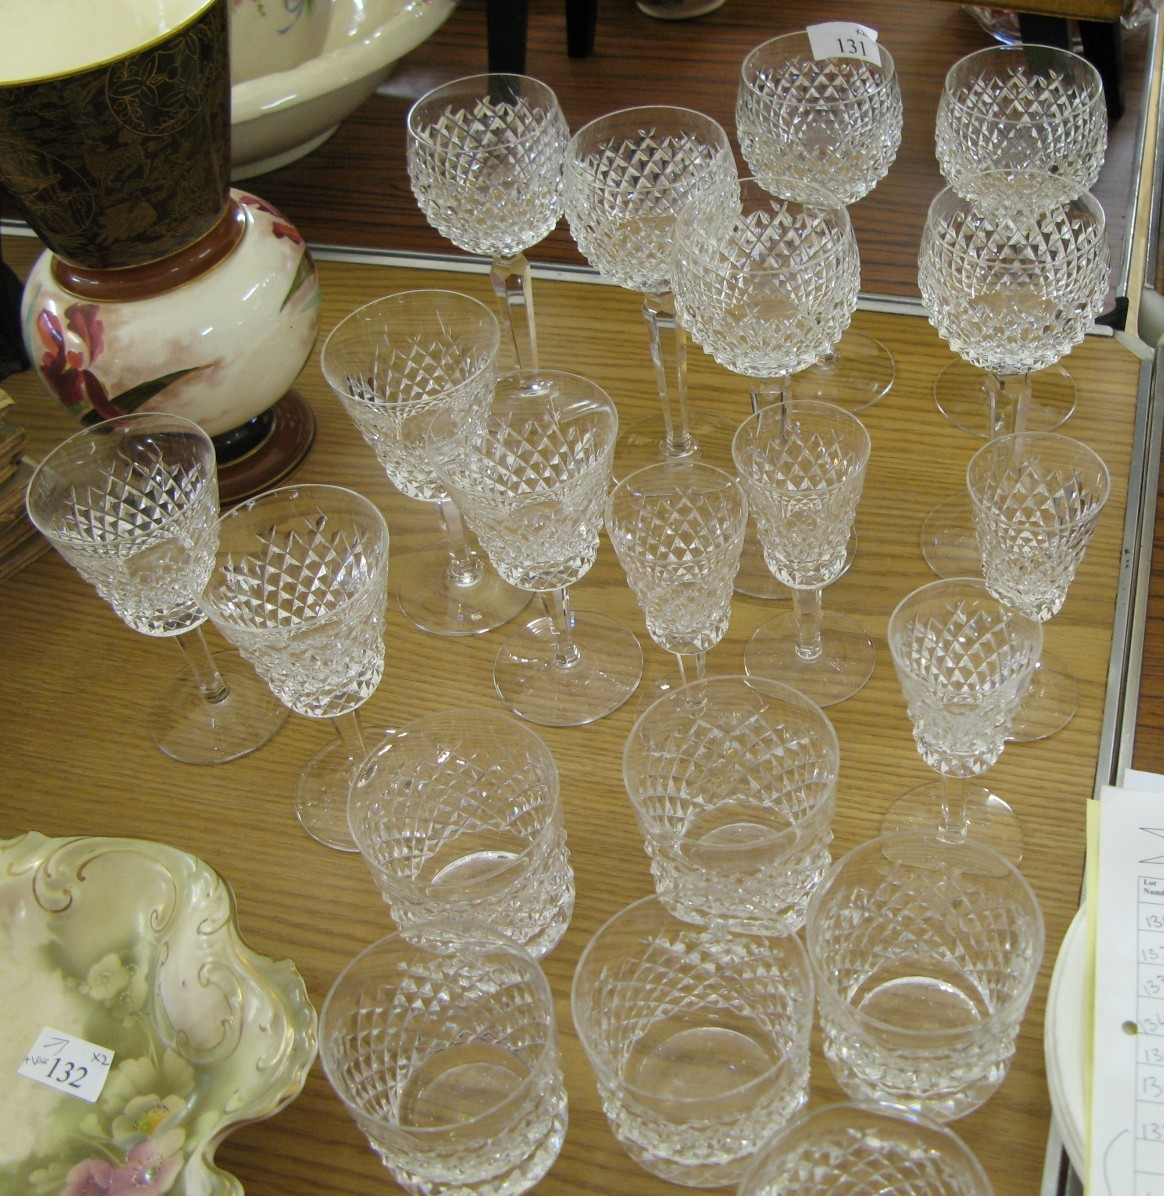 Collection of cut glass glasses - Sold for £135